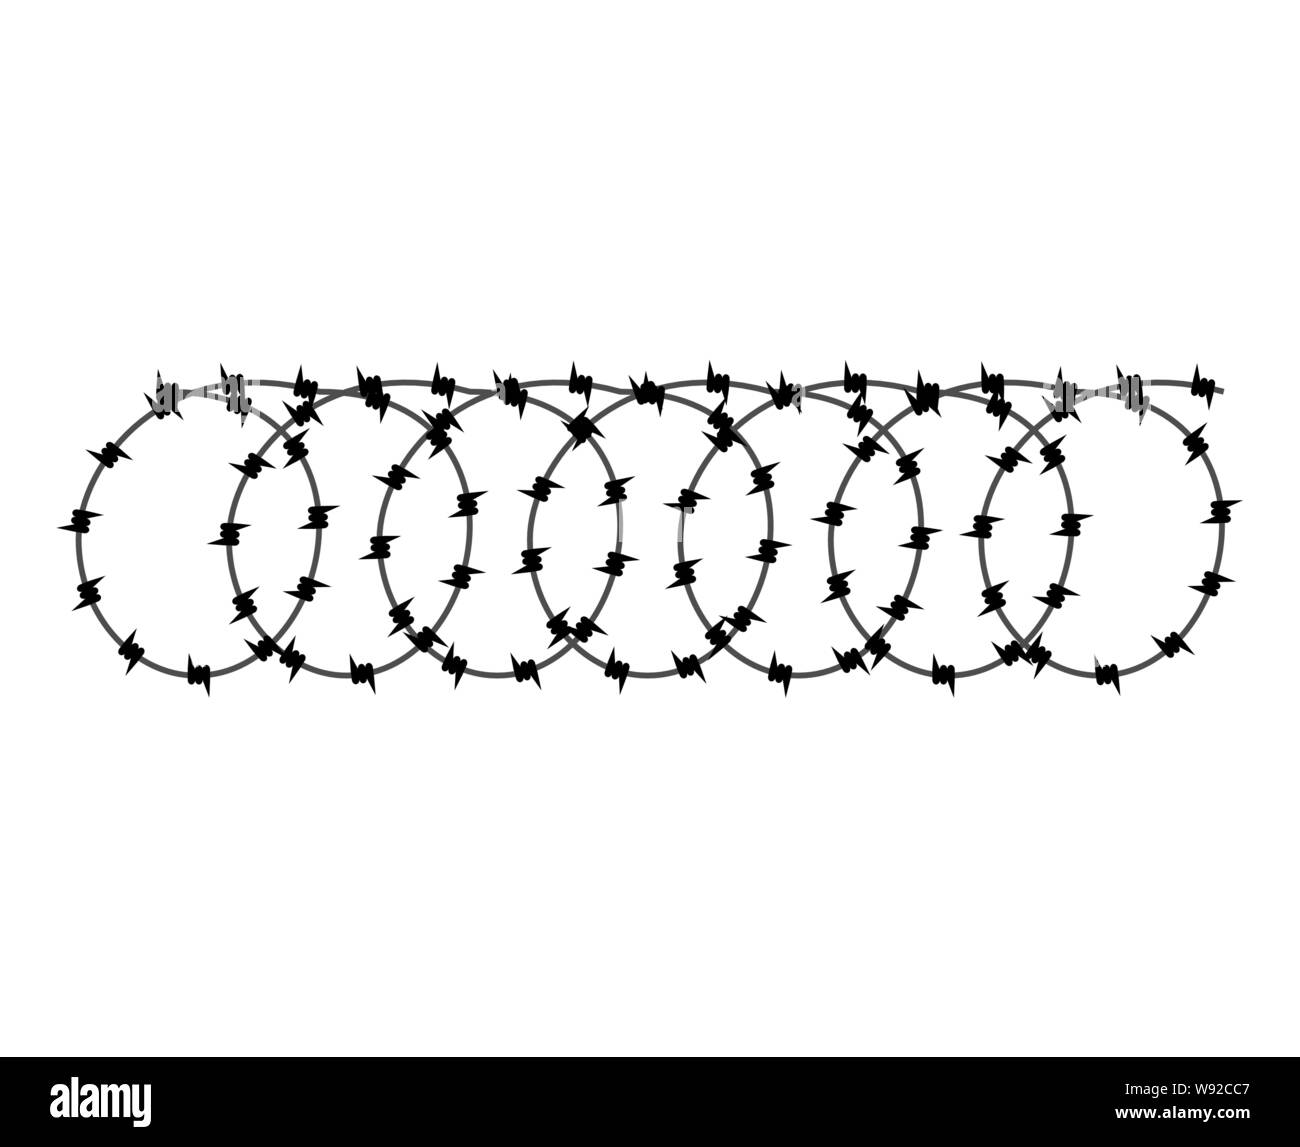 Barbed wire isolated. barbwire vector illustration. Protective fencing Stock Vector